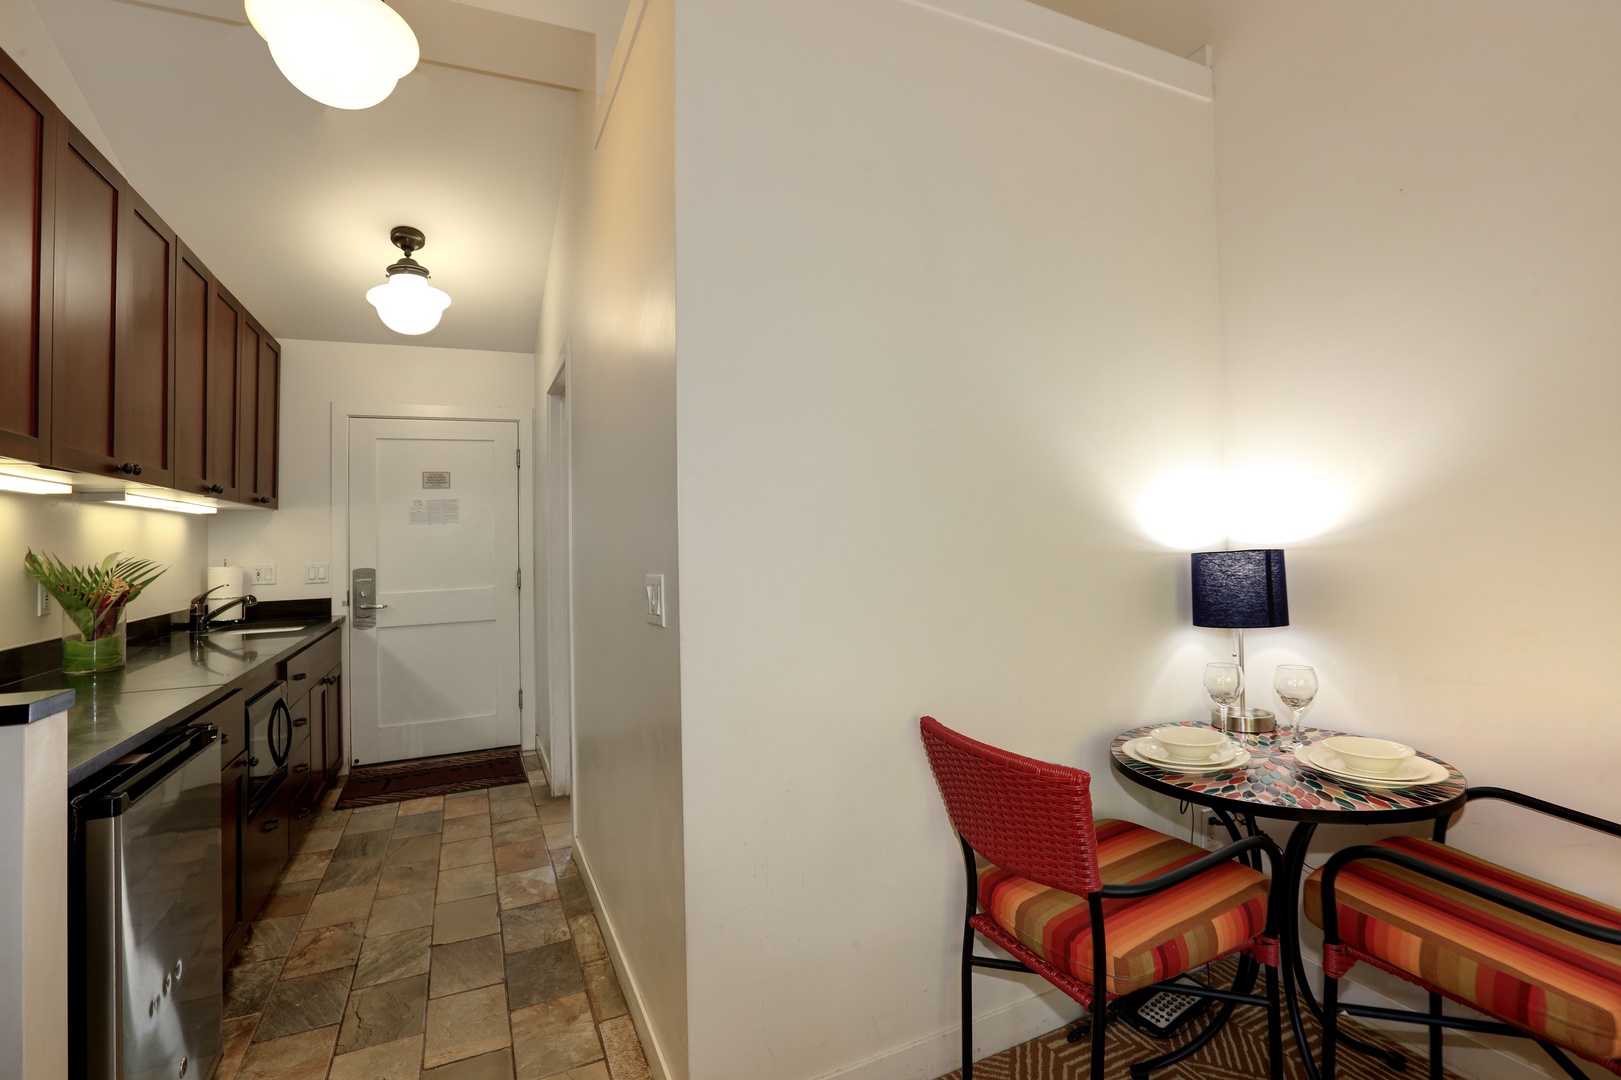 Lahaina Vacation Rentals, Aina Nalu F201 - Dining for two with all the kitchen amenities needed